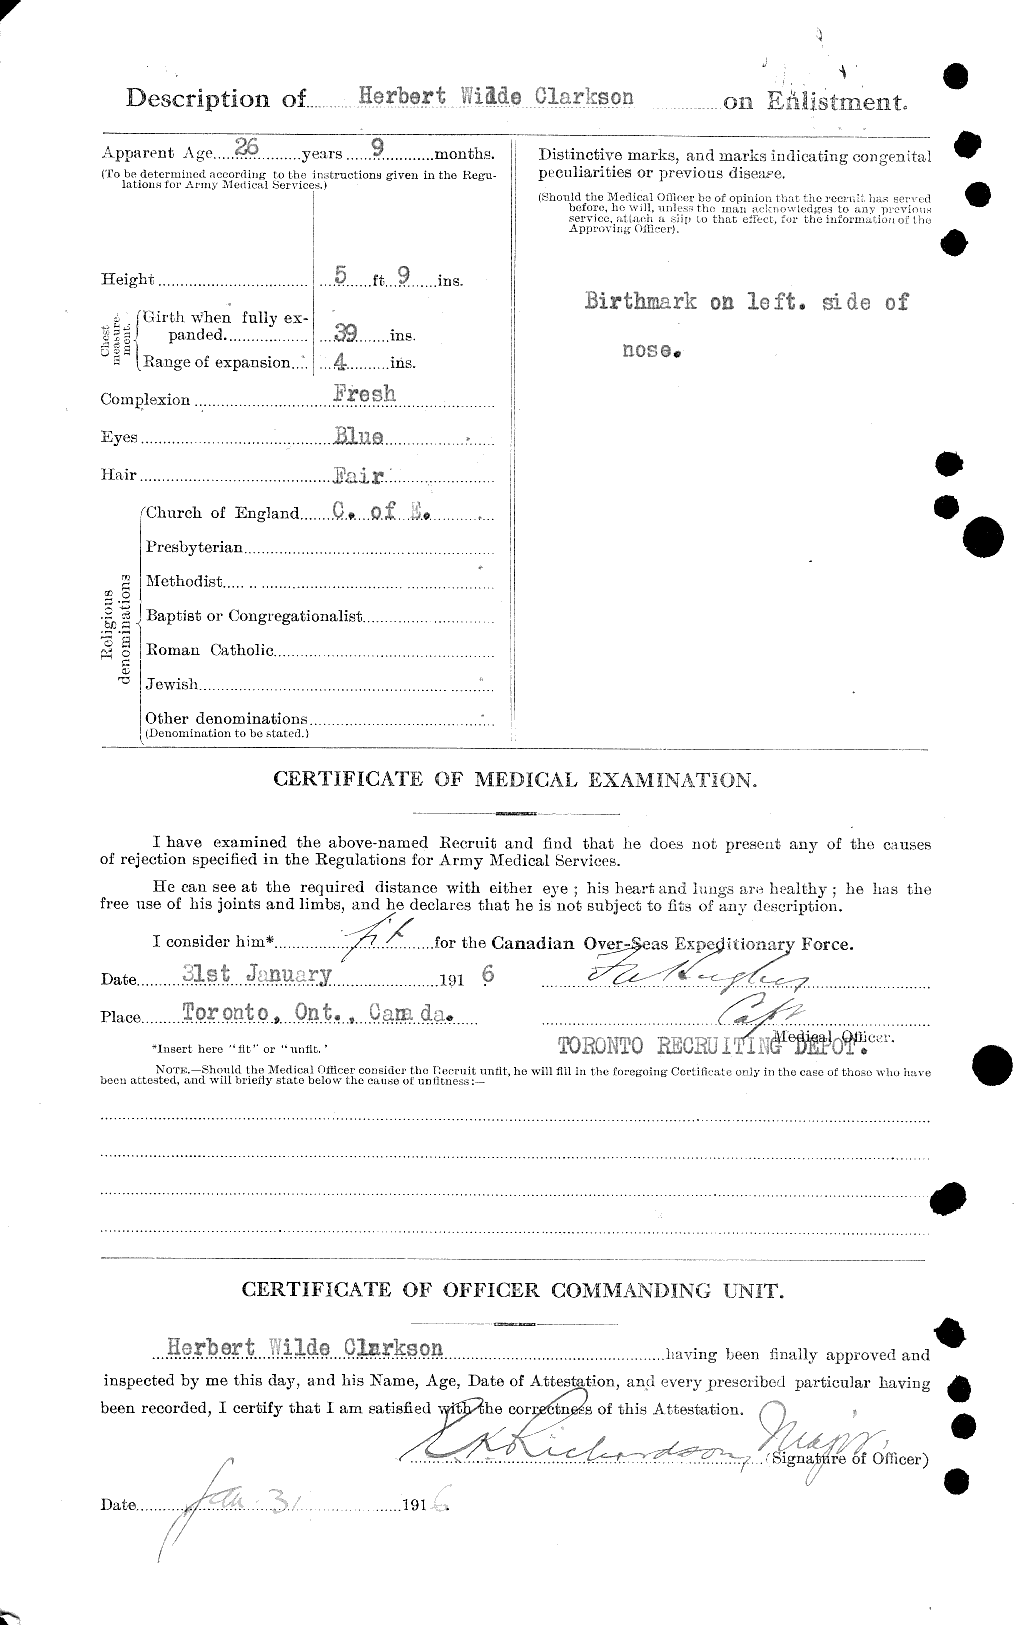 Personnel Records of the First World War - CEF 021440b